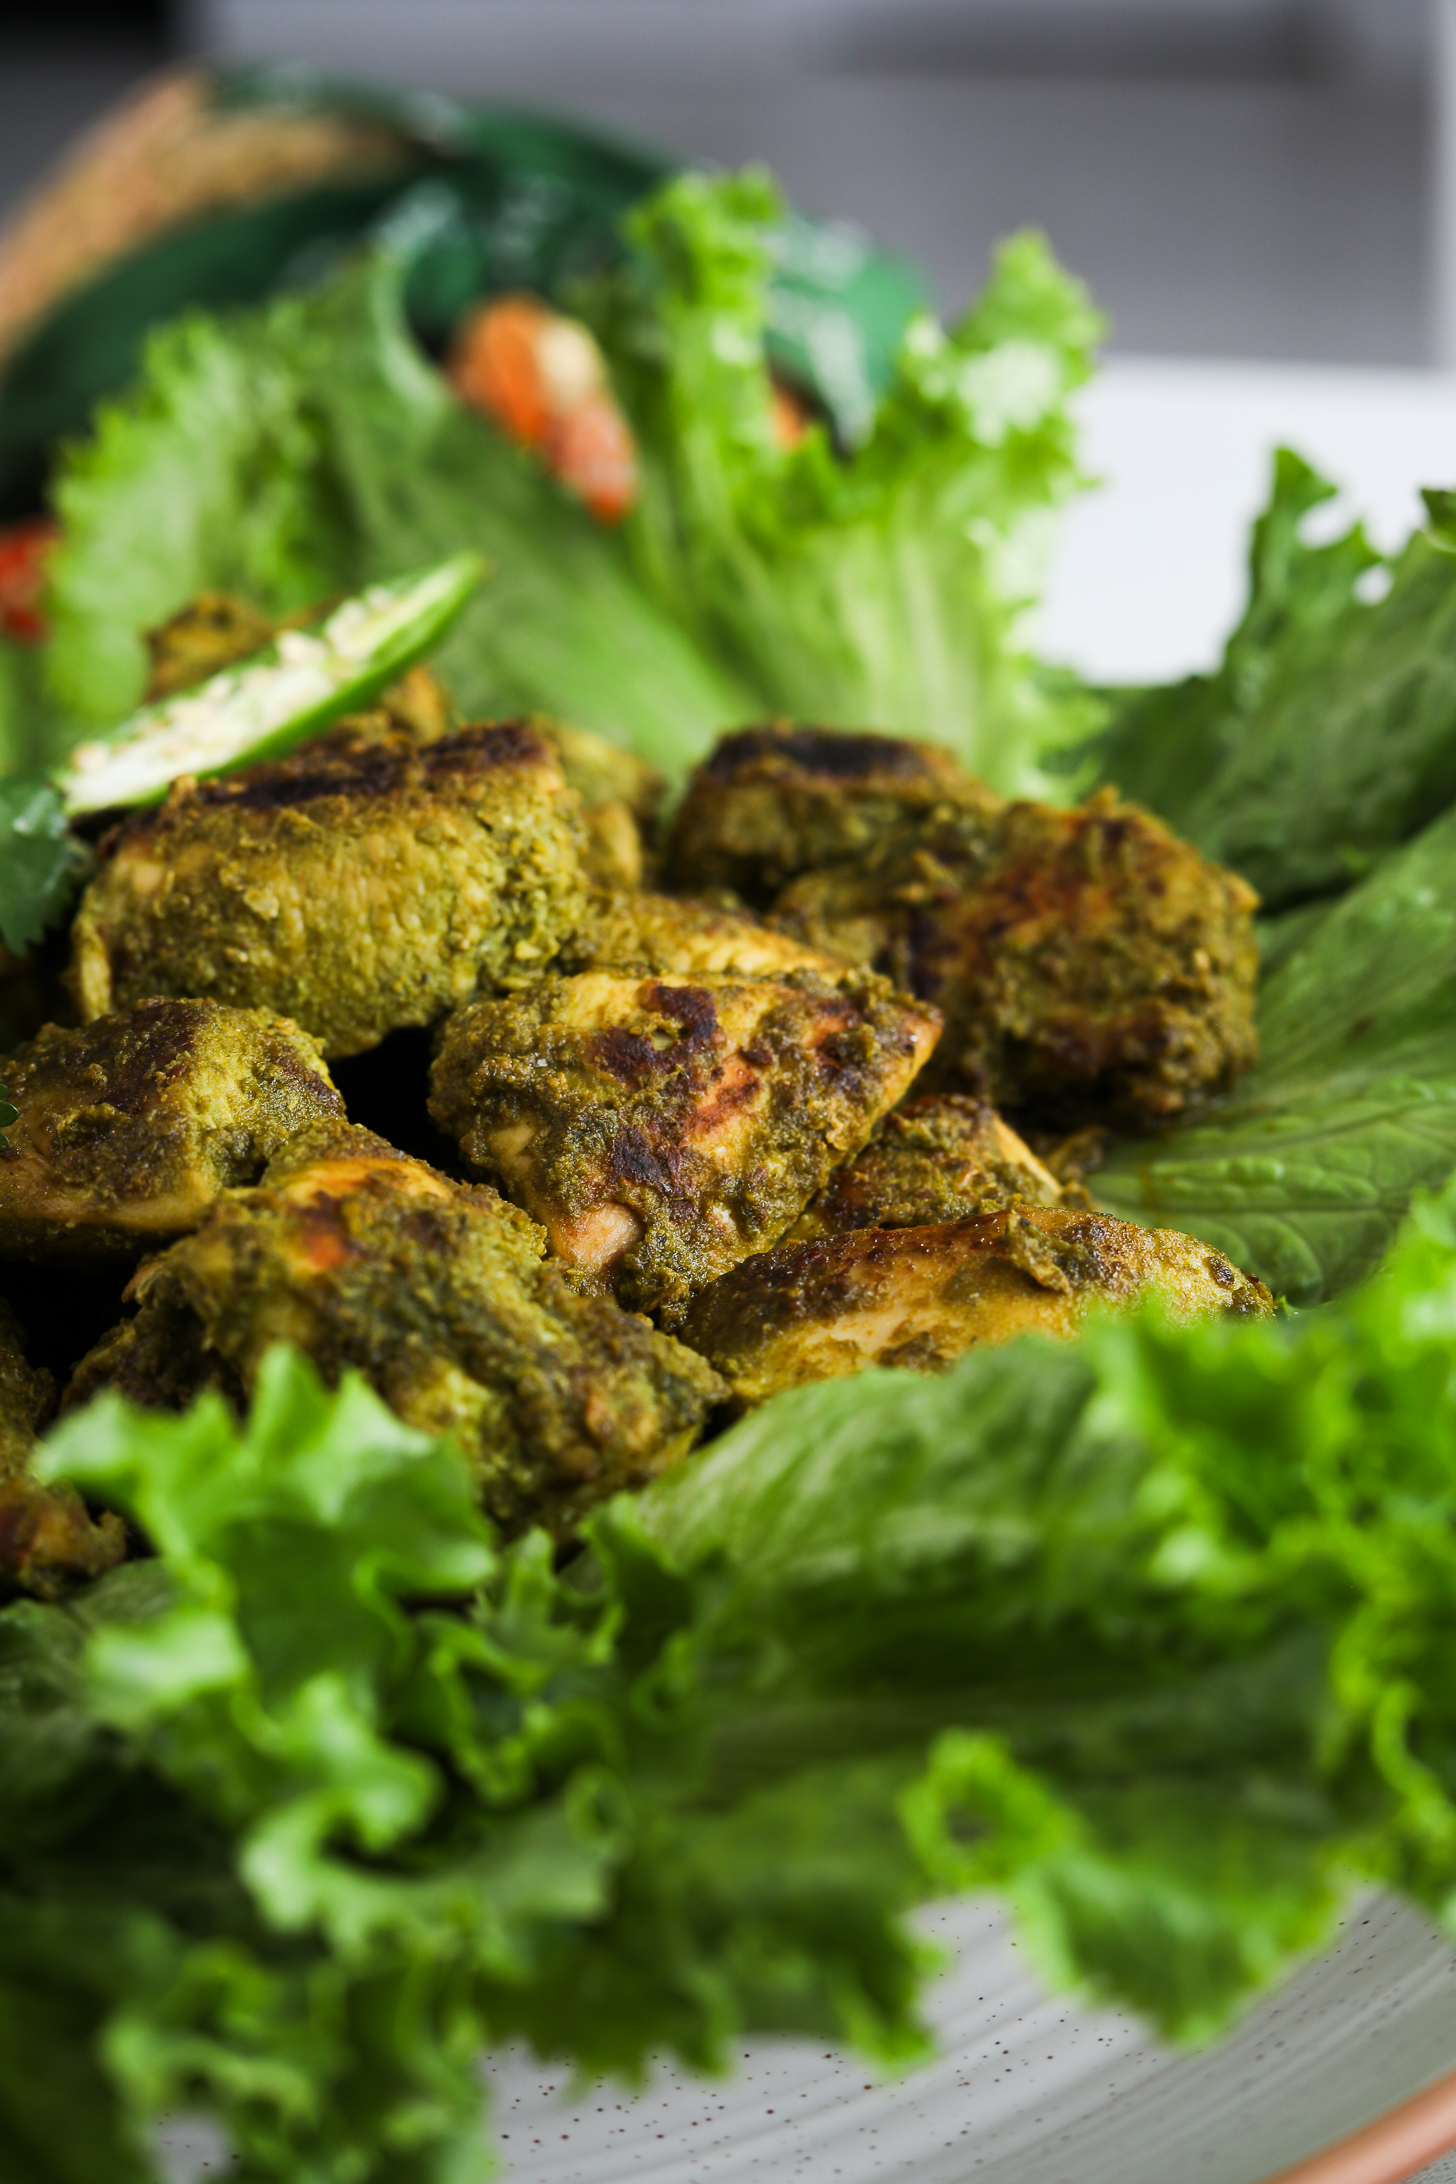 Perspective image of green chicken (Hariyali chicken) breast pieces placed on lettuce leaves.